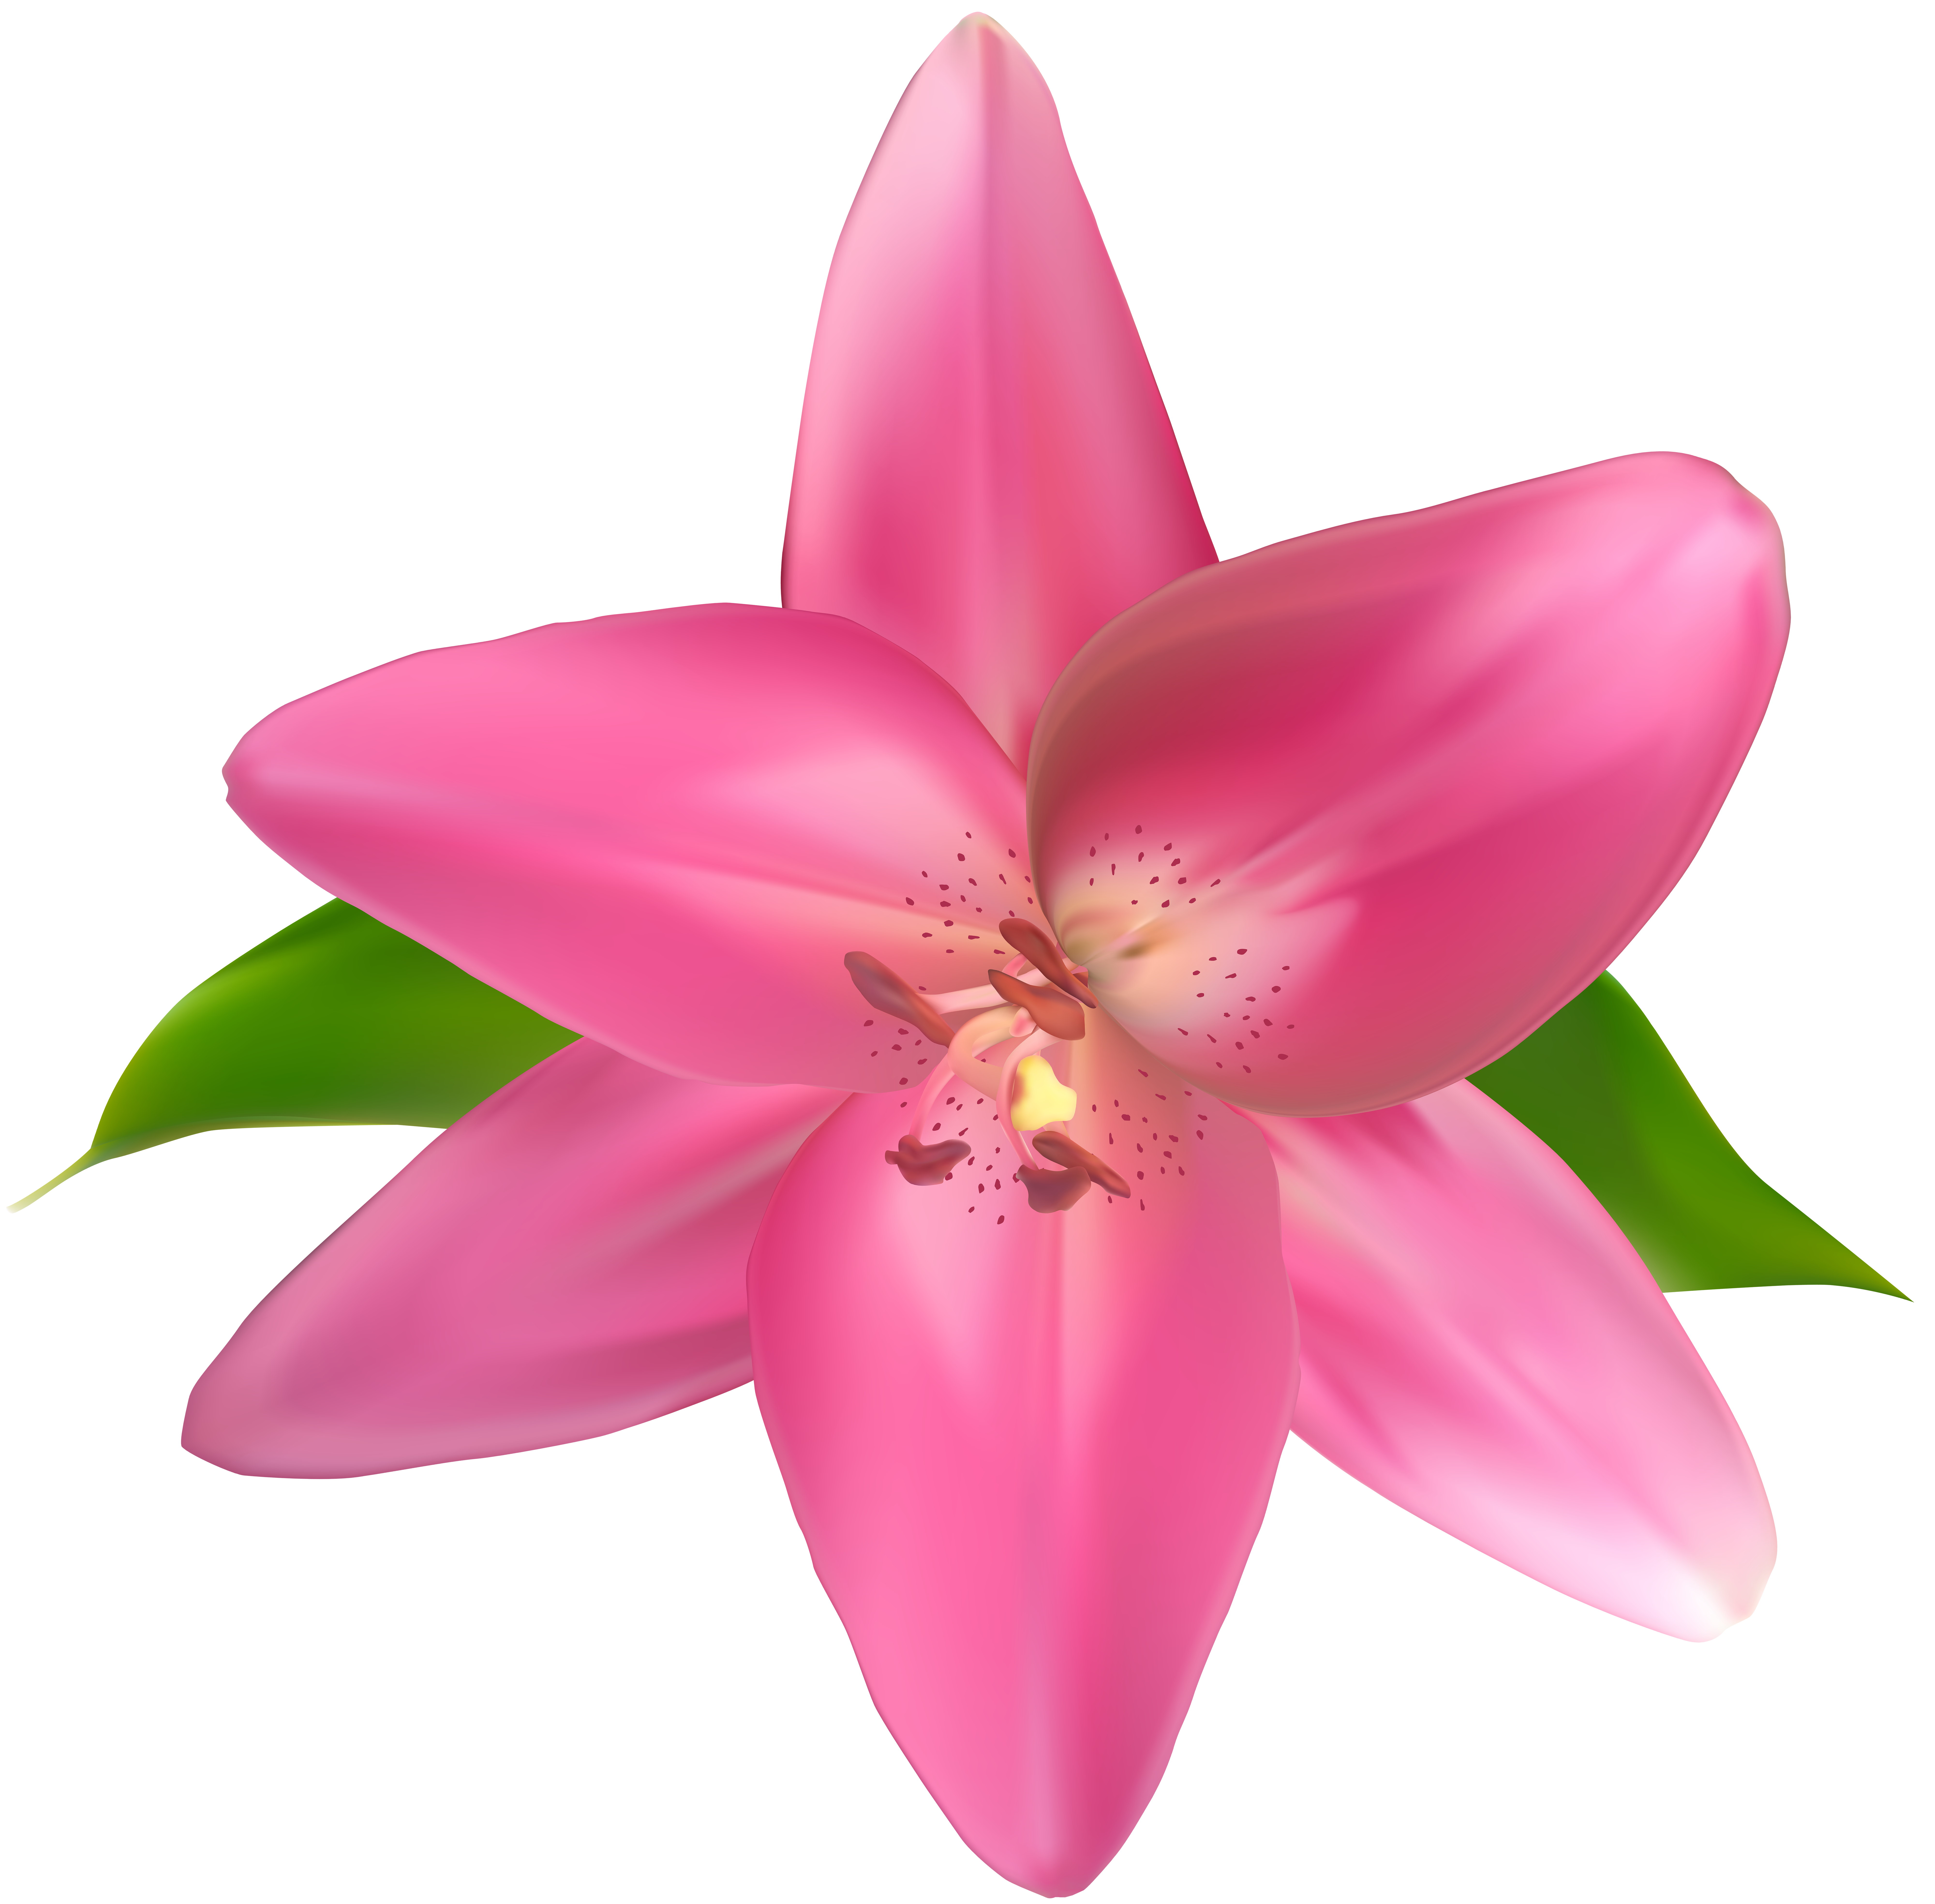 Lily clipart pomegranate flower, Lily pomegranate flower